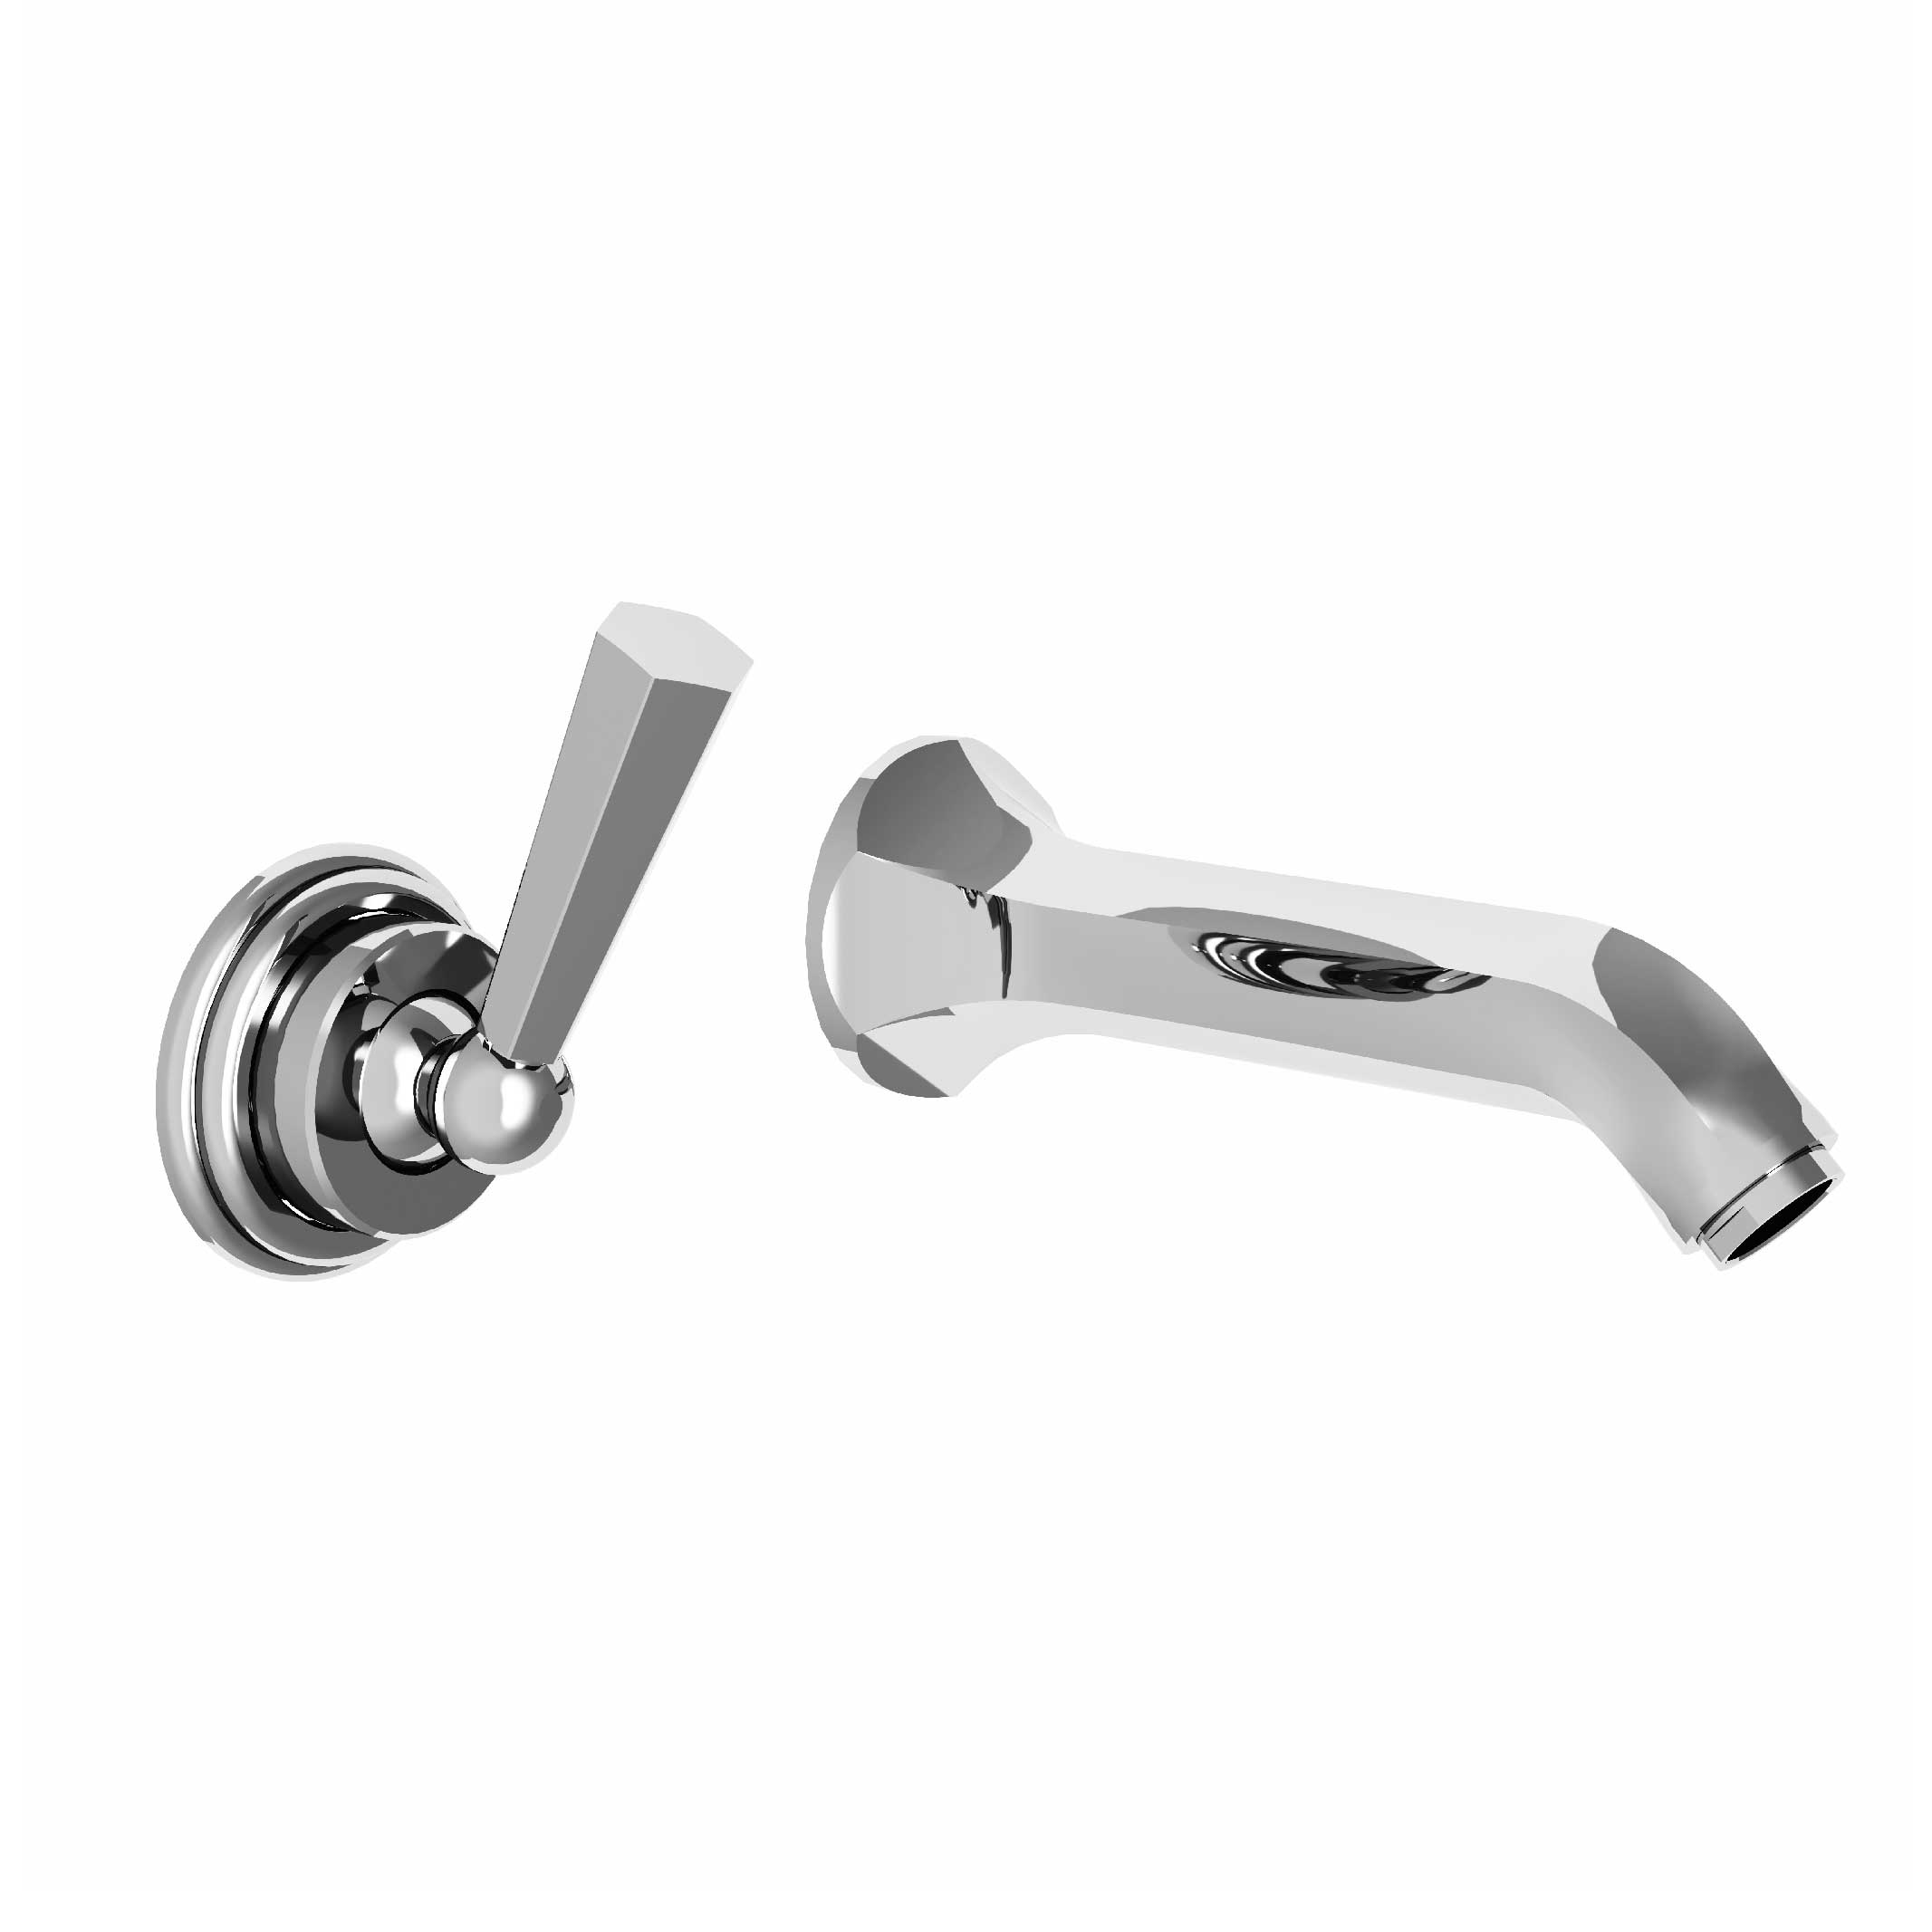 M39-1203M Wall mounted single lever basin mixer, built-in